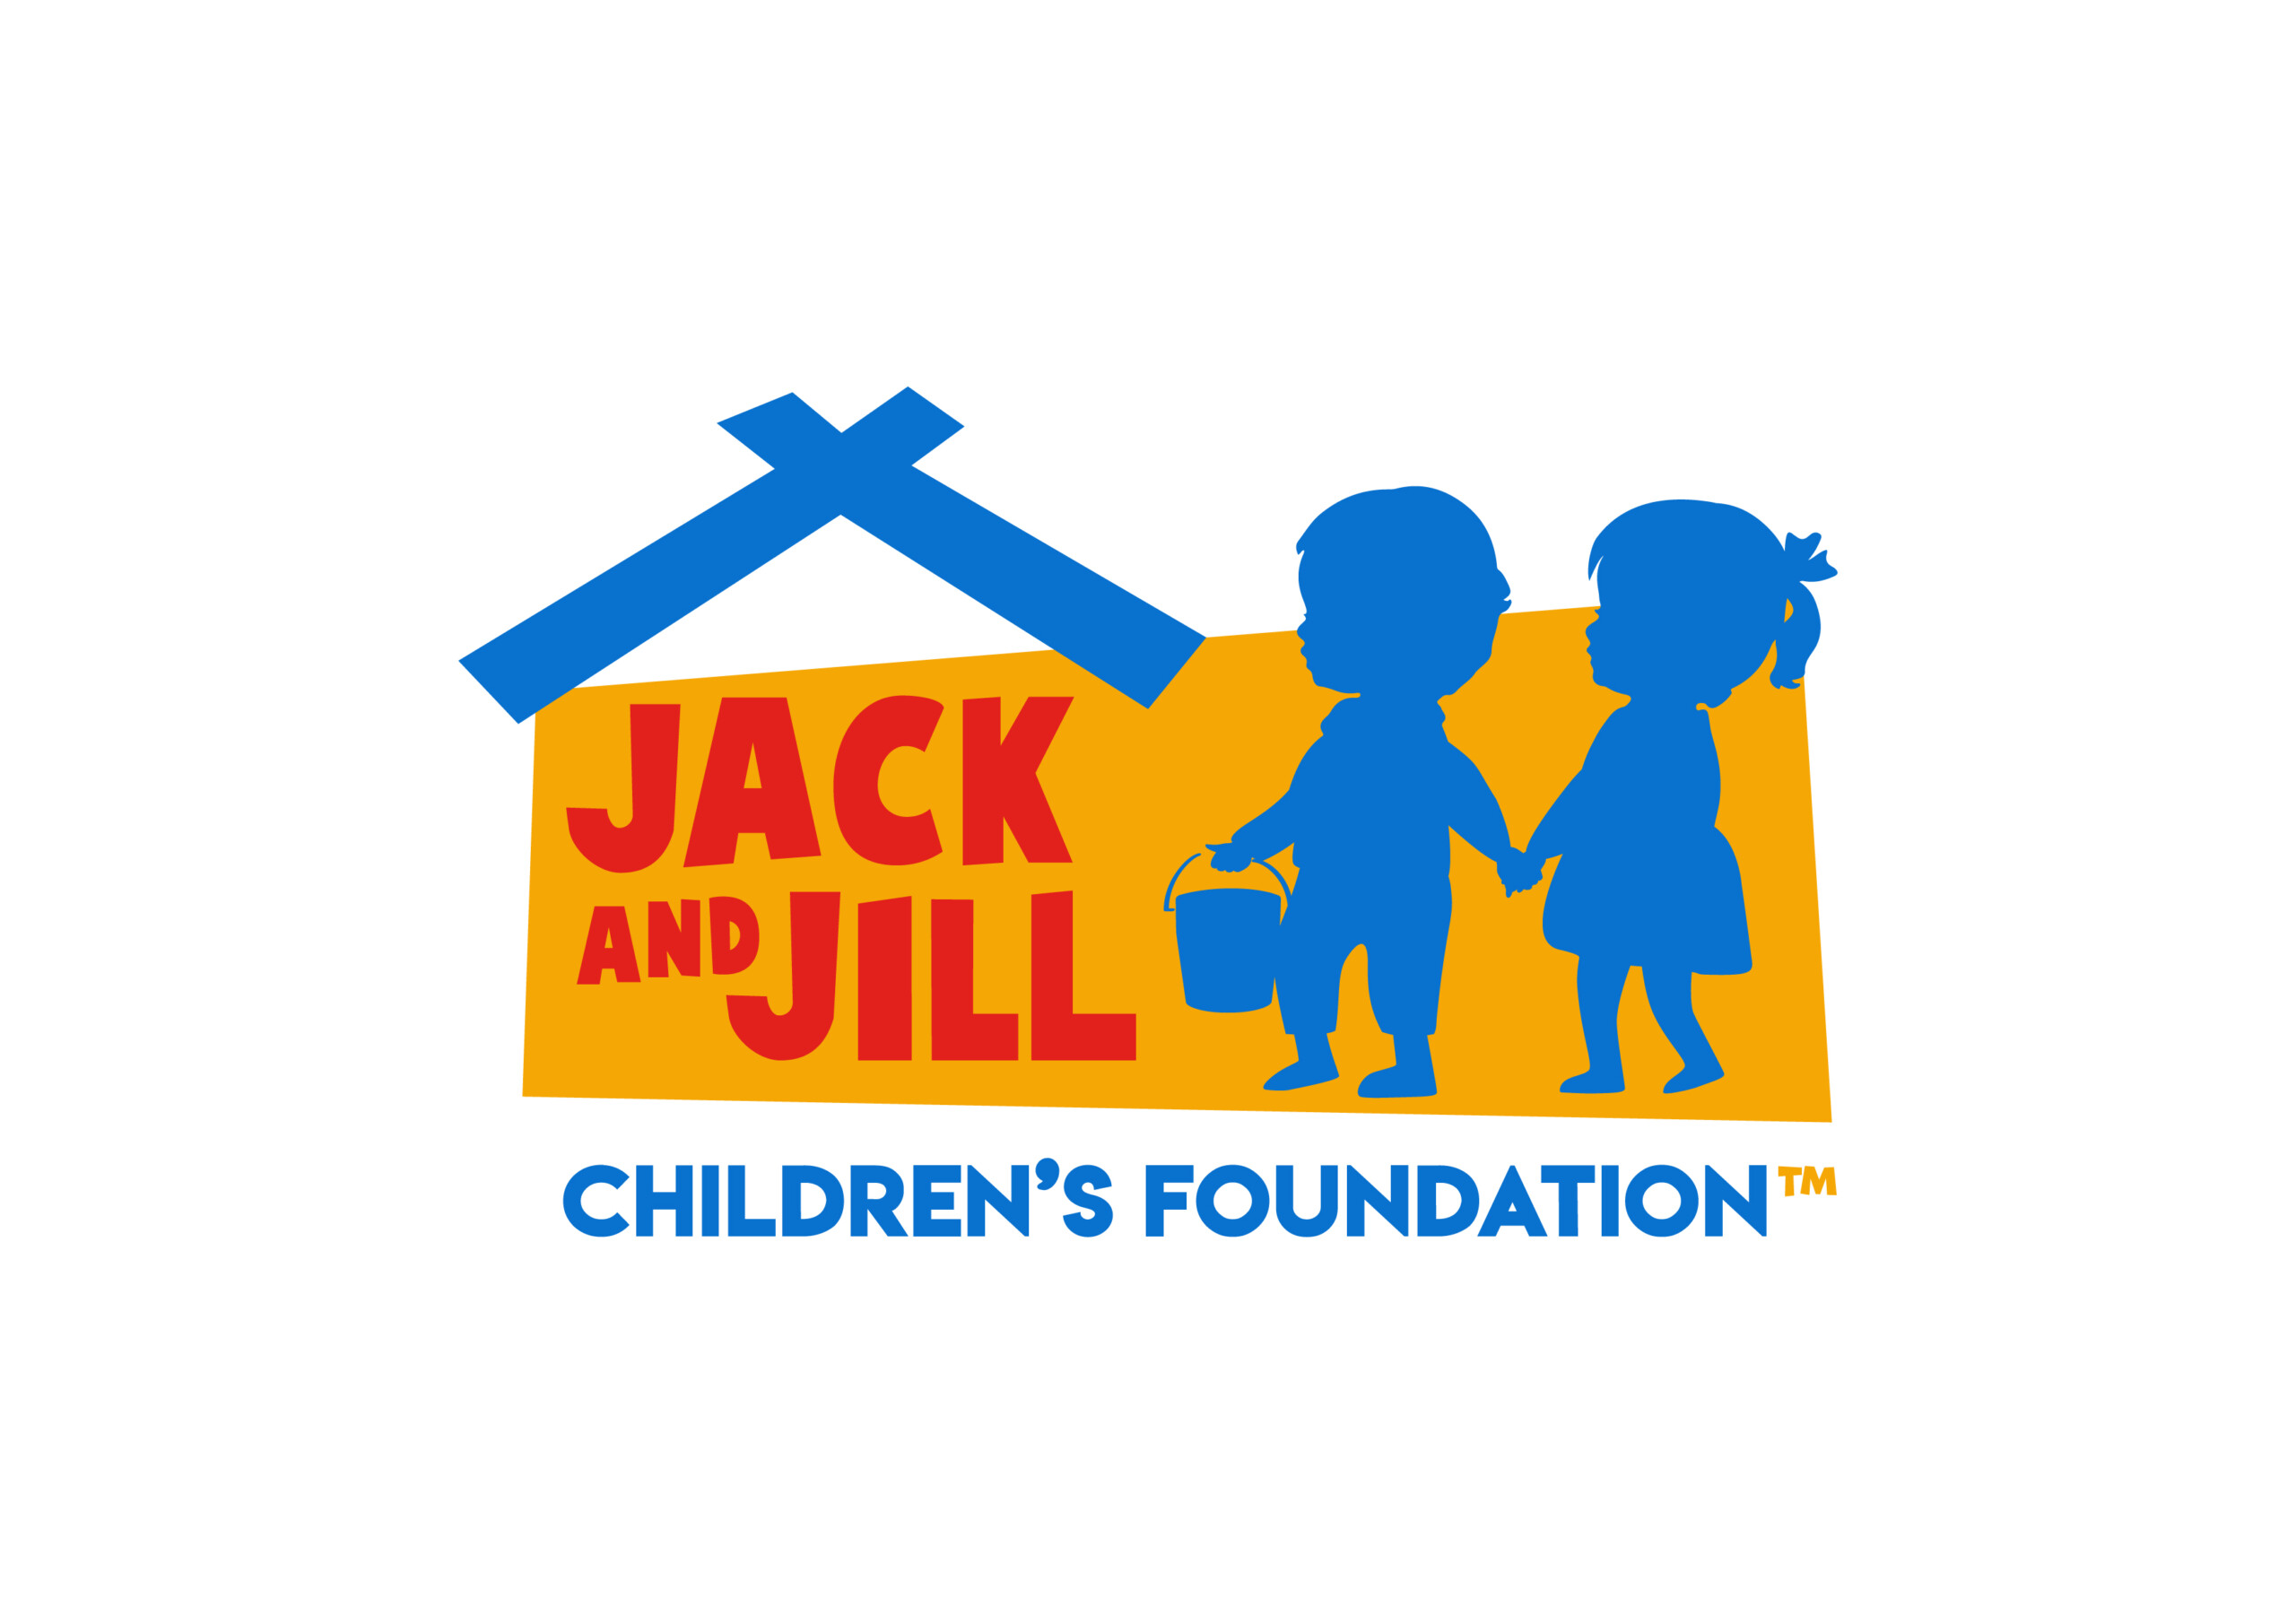 The Jack and Jill Children’s Foundation